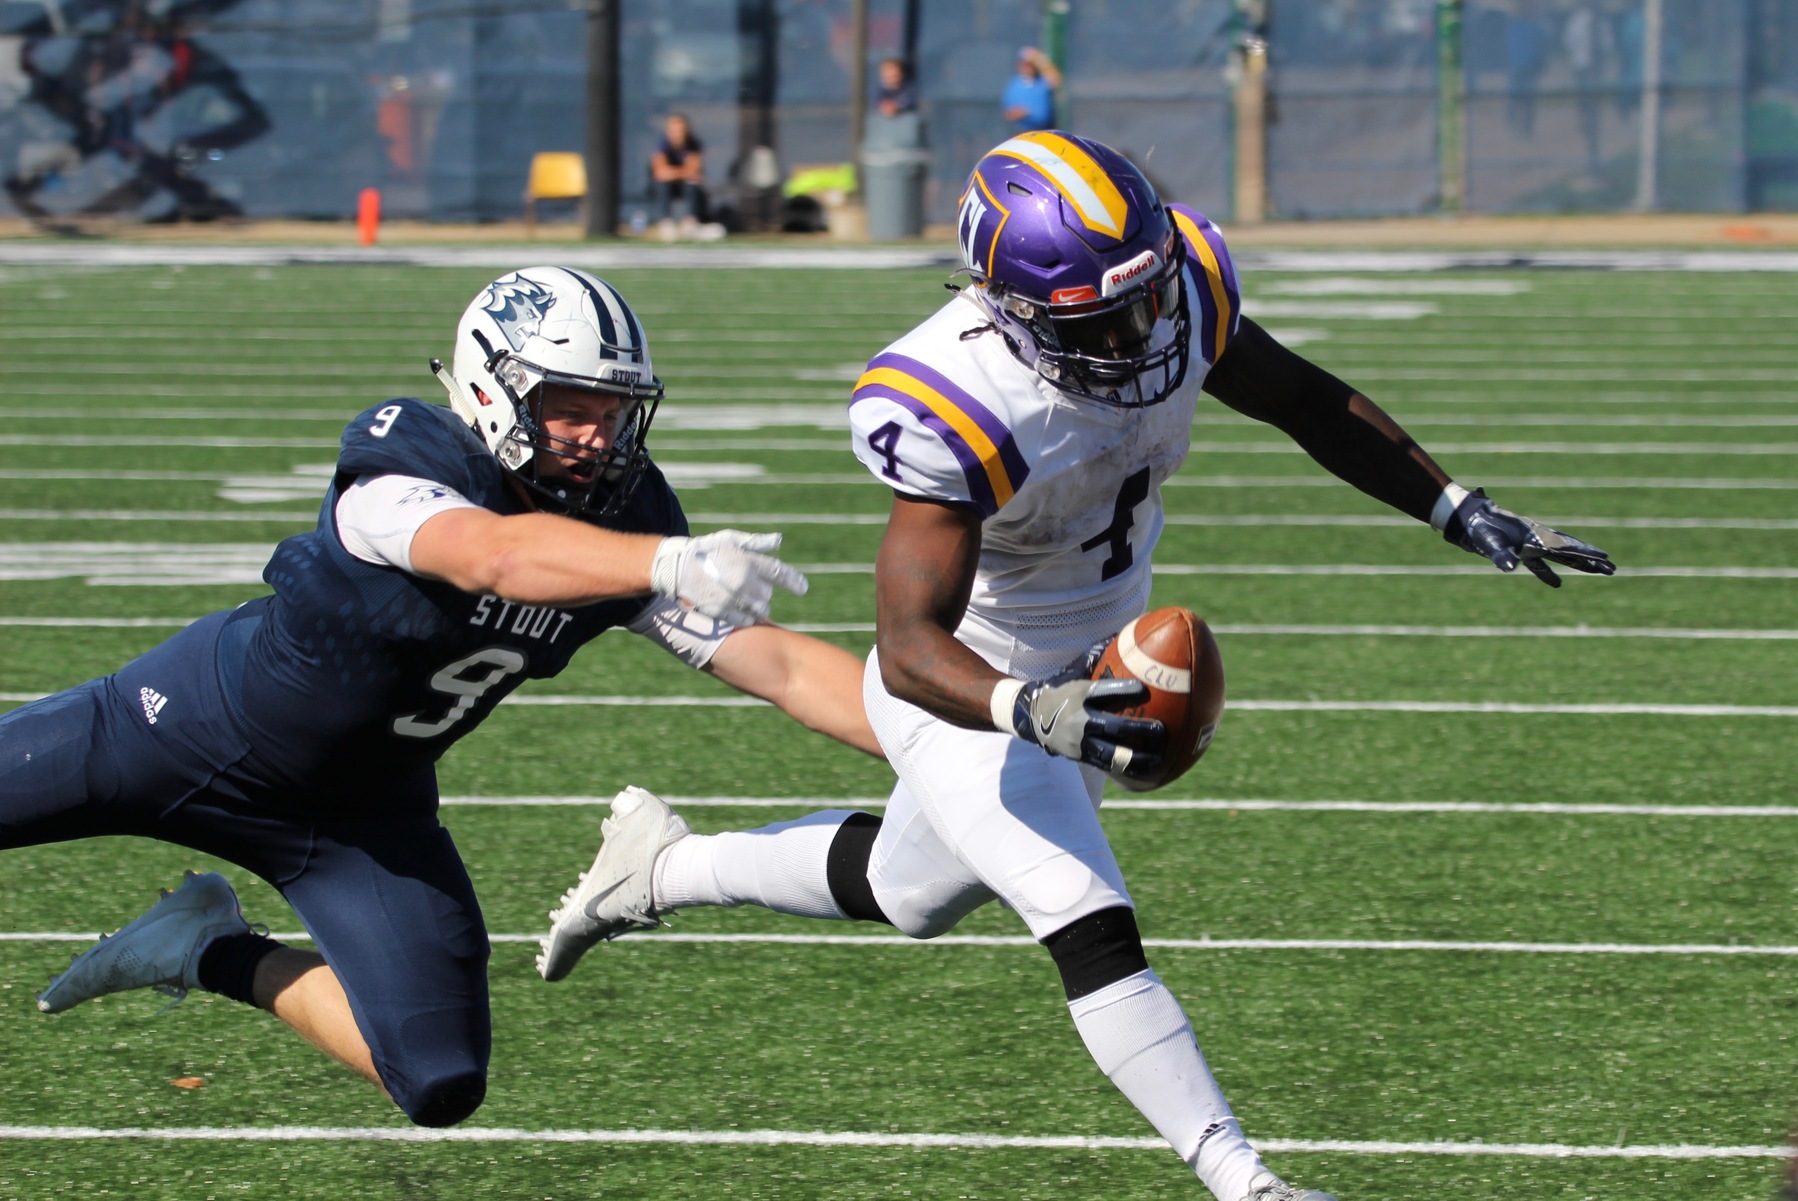 Chris Anderson dives for the pylon and scores a 2-yard rushing touchdown against UW-Stout. (Credit: David Lassen)